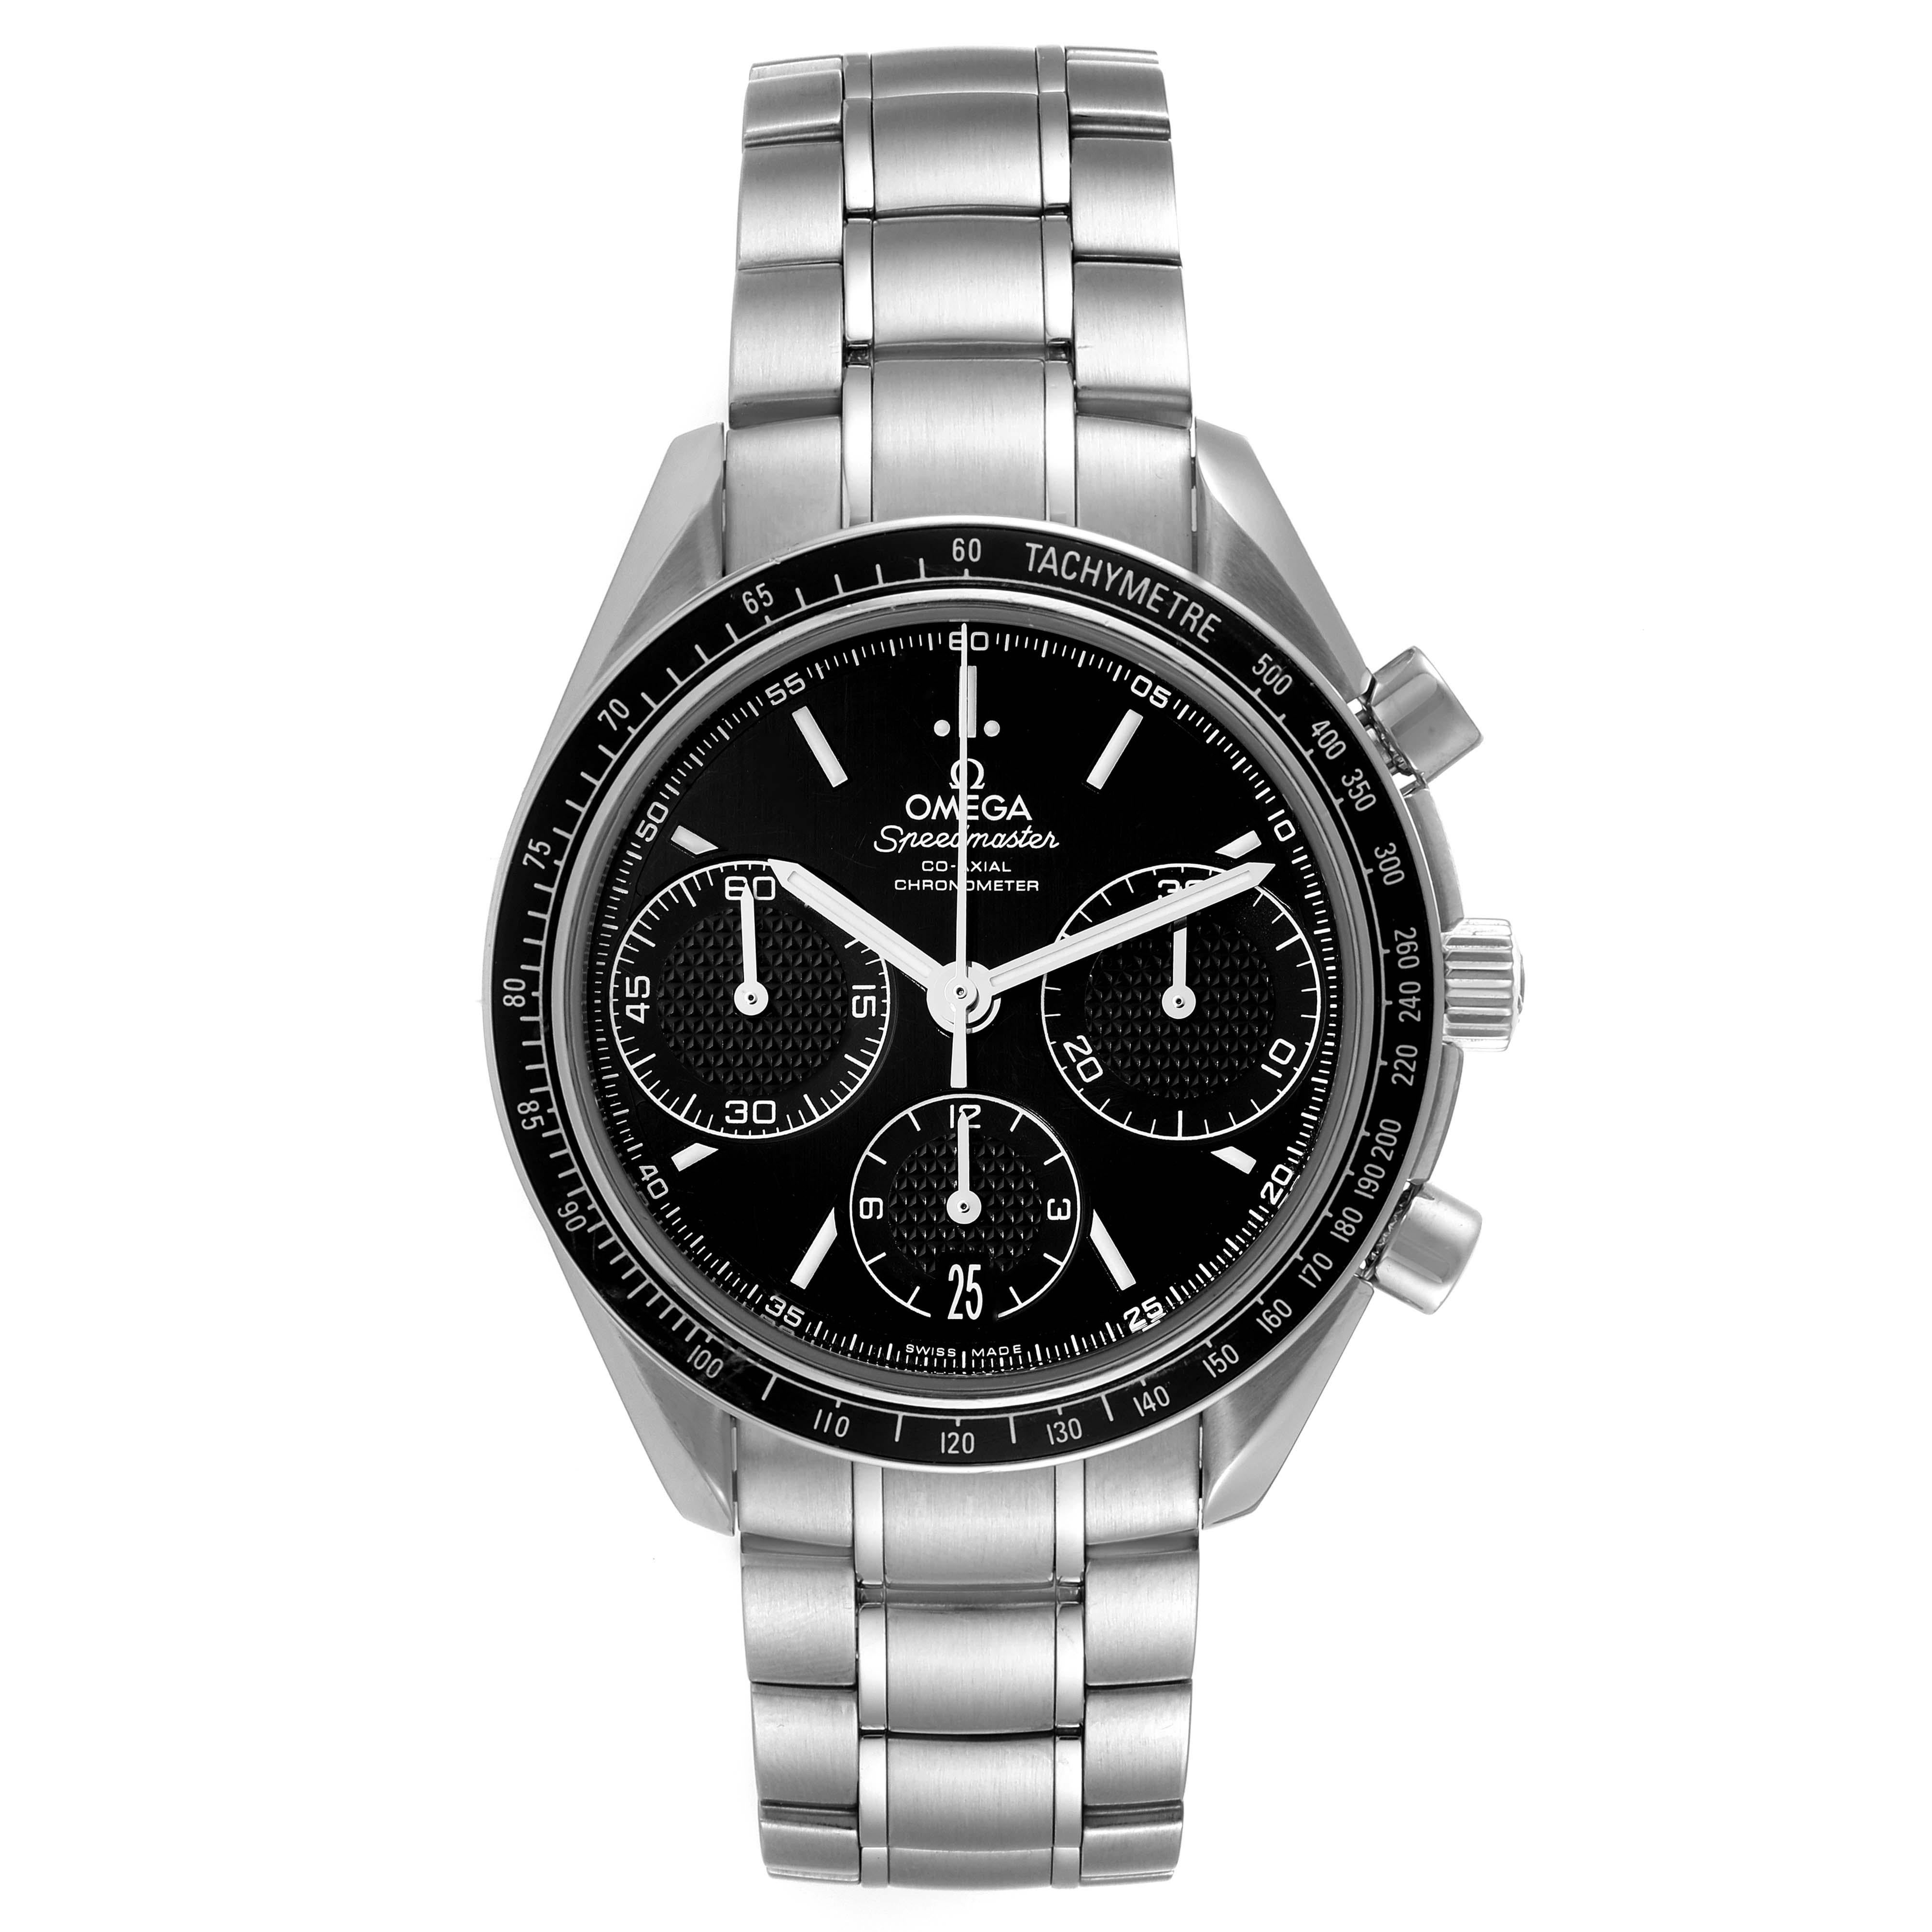 Omega Speedmaster Racing Steel Mens Watch 326.30.40.50.01.001 Box Card. COSC-certified Omega automatic chronograph movement with a column-wheel mechanism, a Co-Axial Escapement, and a silicon balance spring. Caliber 3330. Stainless steel round case